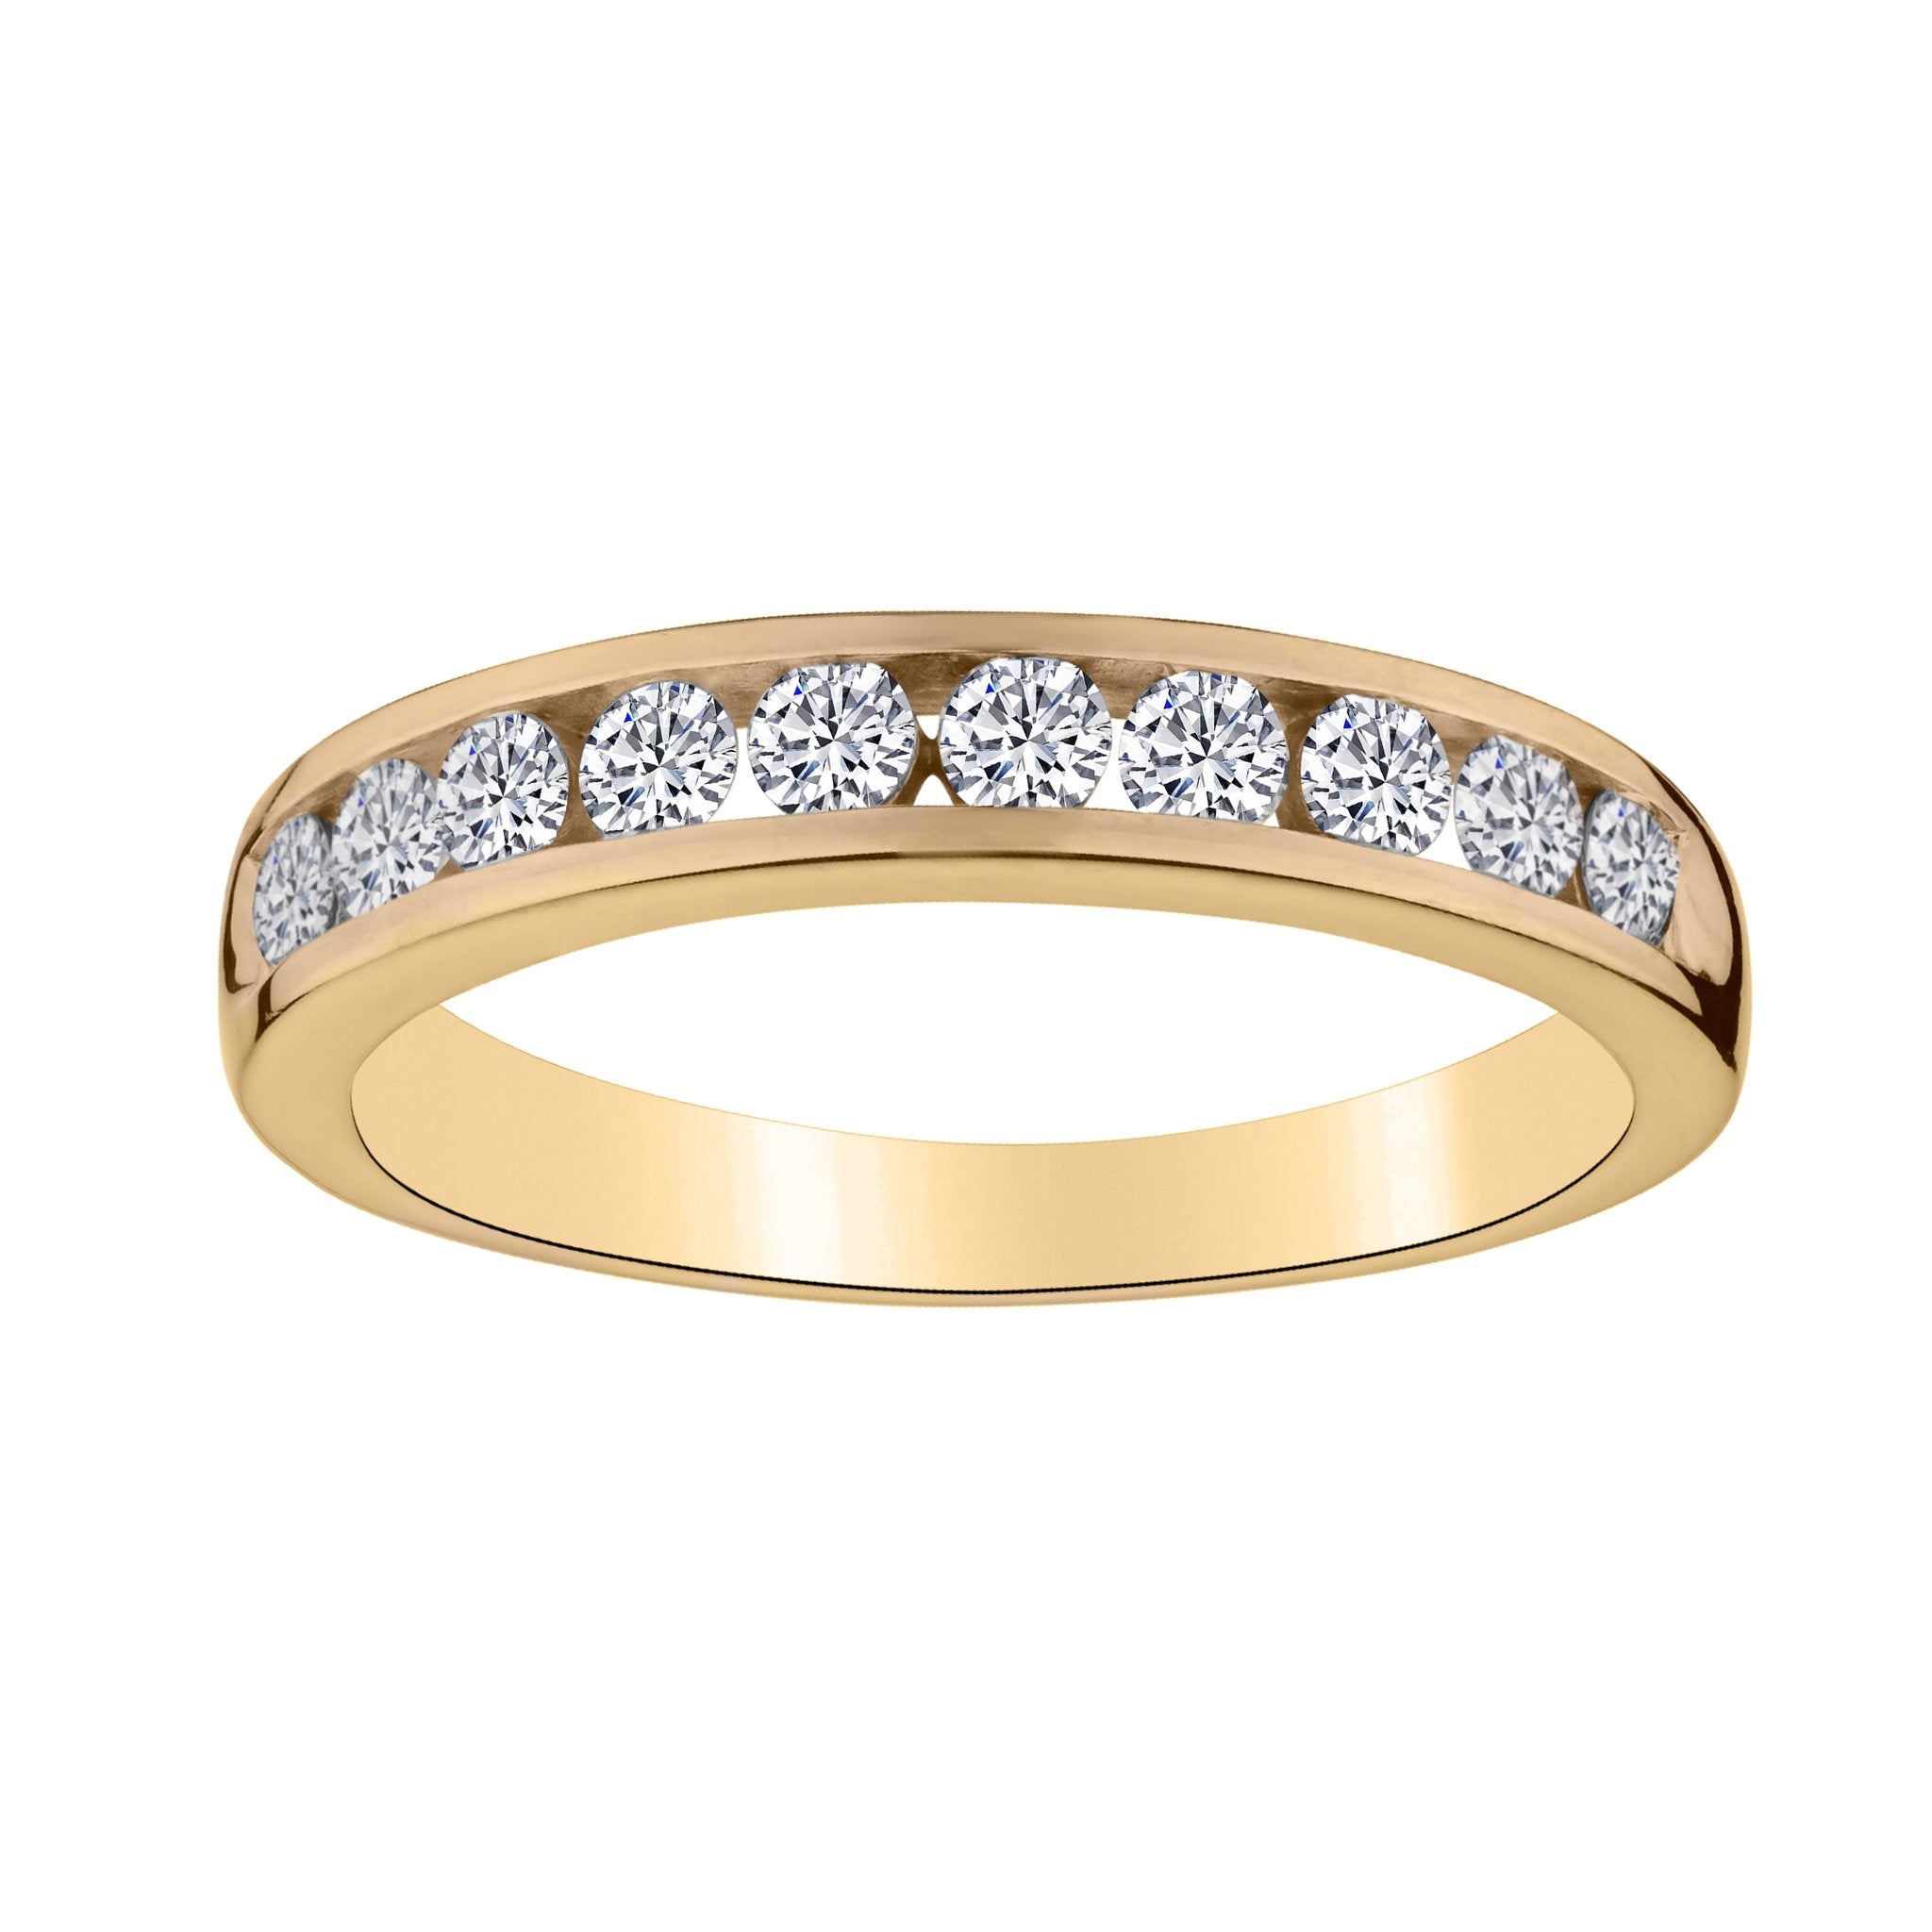 .50 Carat of Diamonds Band Ring, 10kt Yellow Gold....................NOW